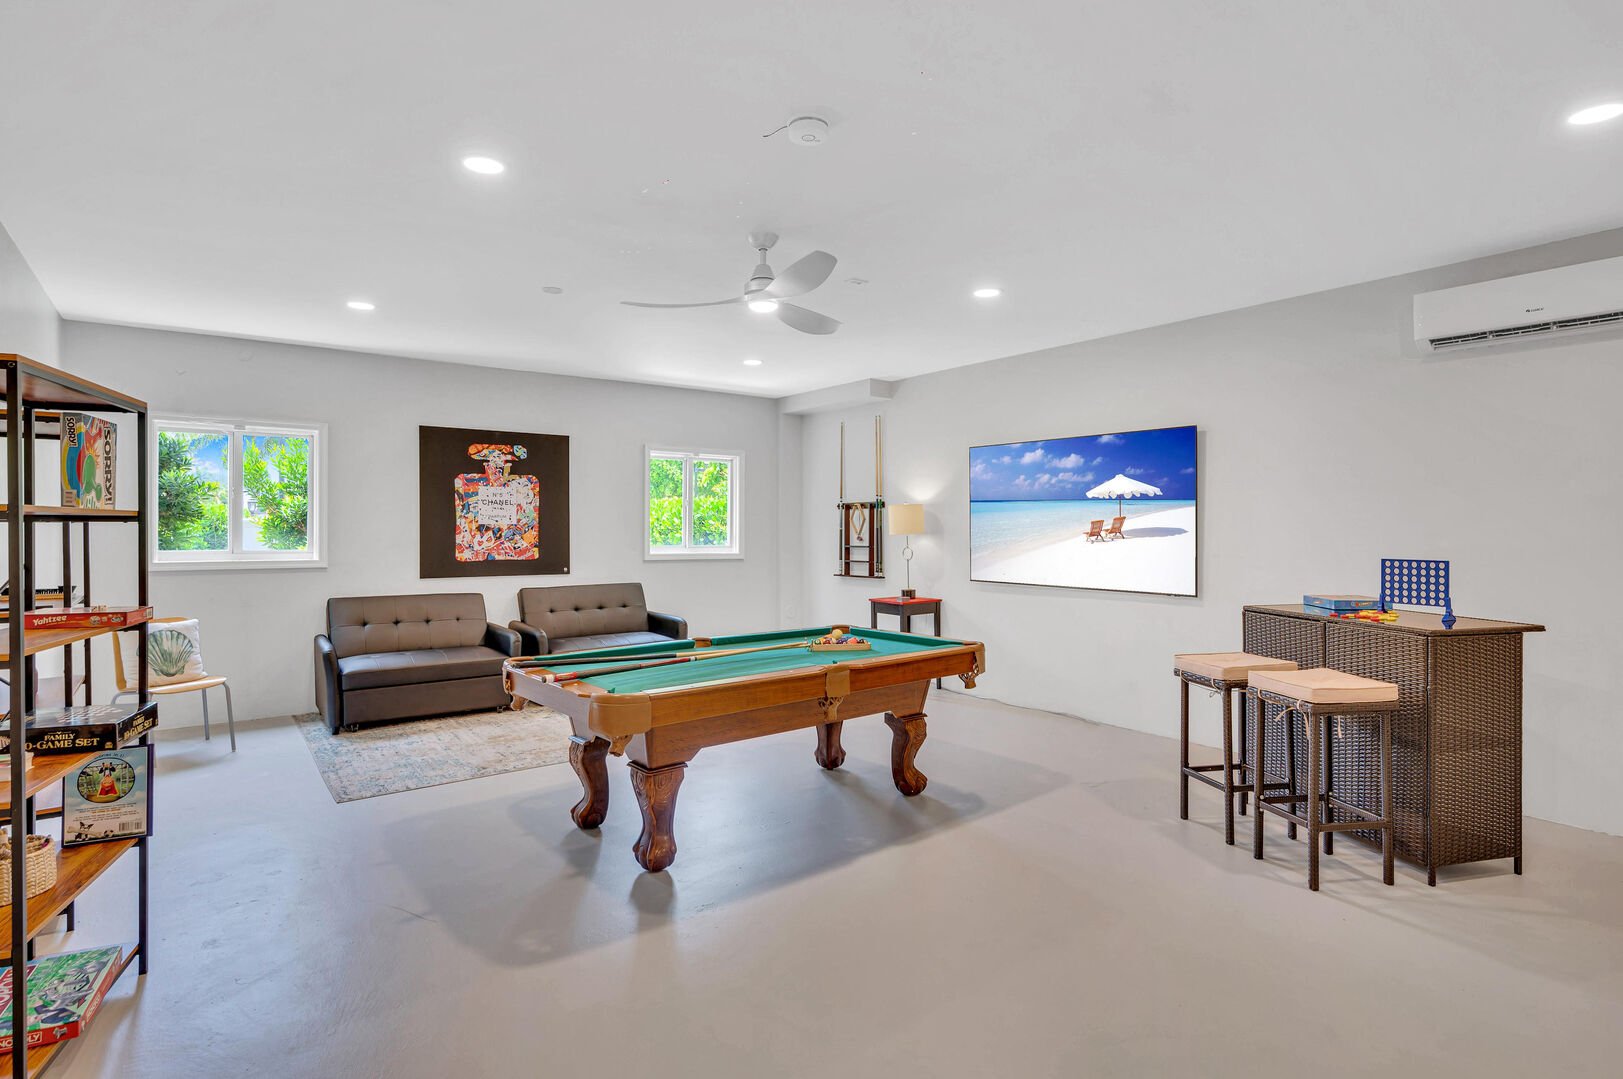 The game room features a pool table, 85' Smart TV, boardgames